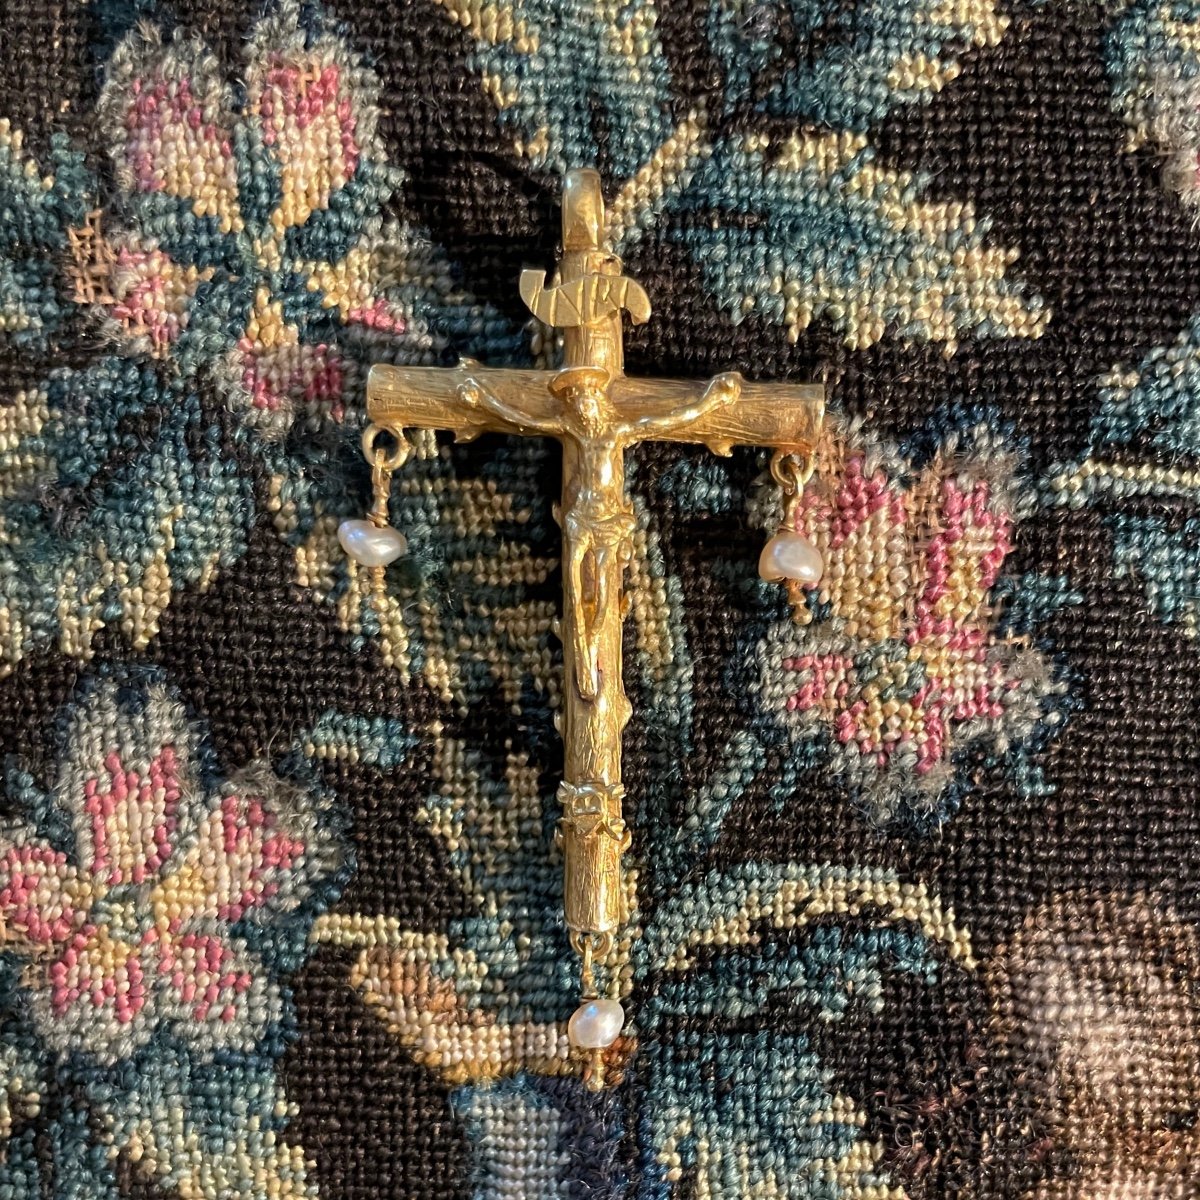 Gold & Enamel Crucifix Pendant With Baroque Pearls. Spanish, Late 16th Century.-photo-6